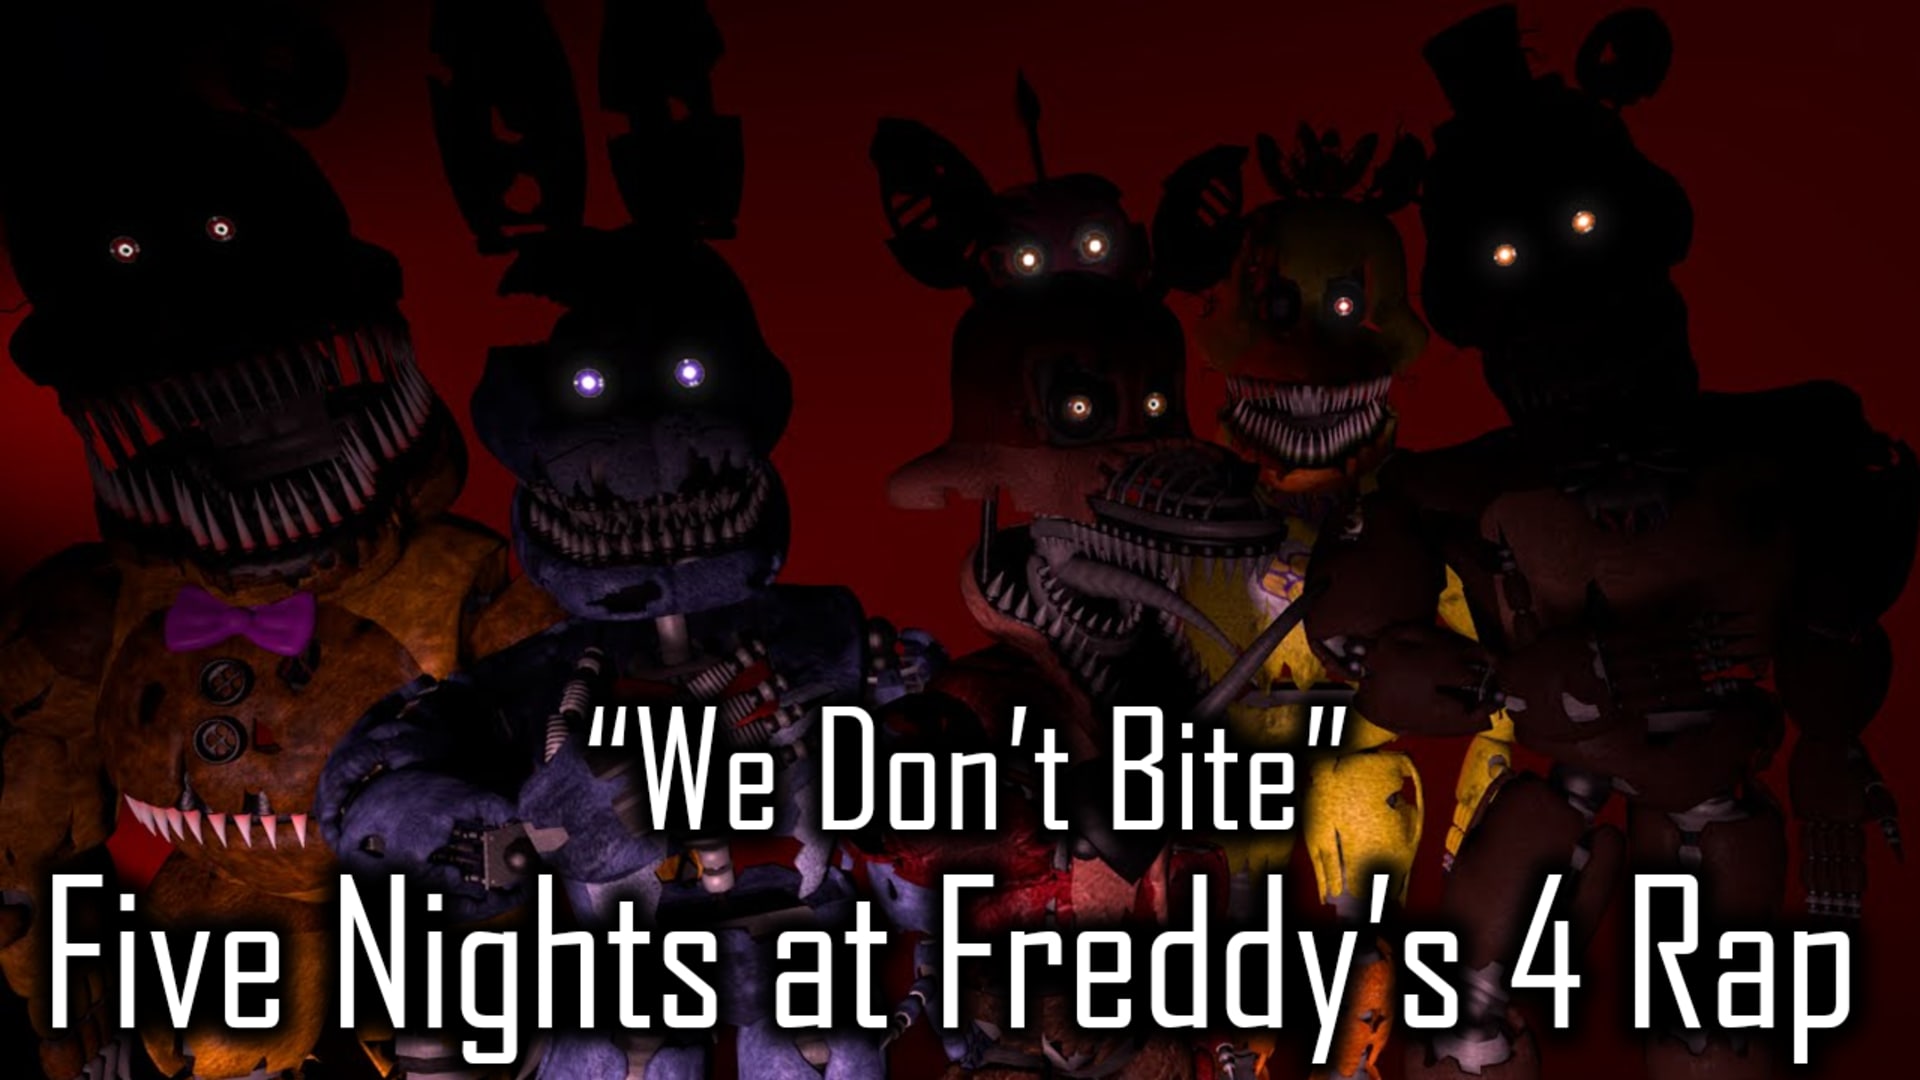 Five Nights at Freddy's 3 Rap - Another Five Nights - Rooster Teeth